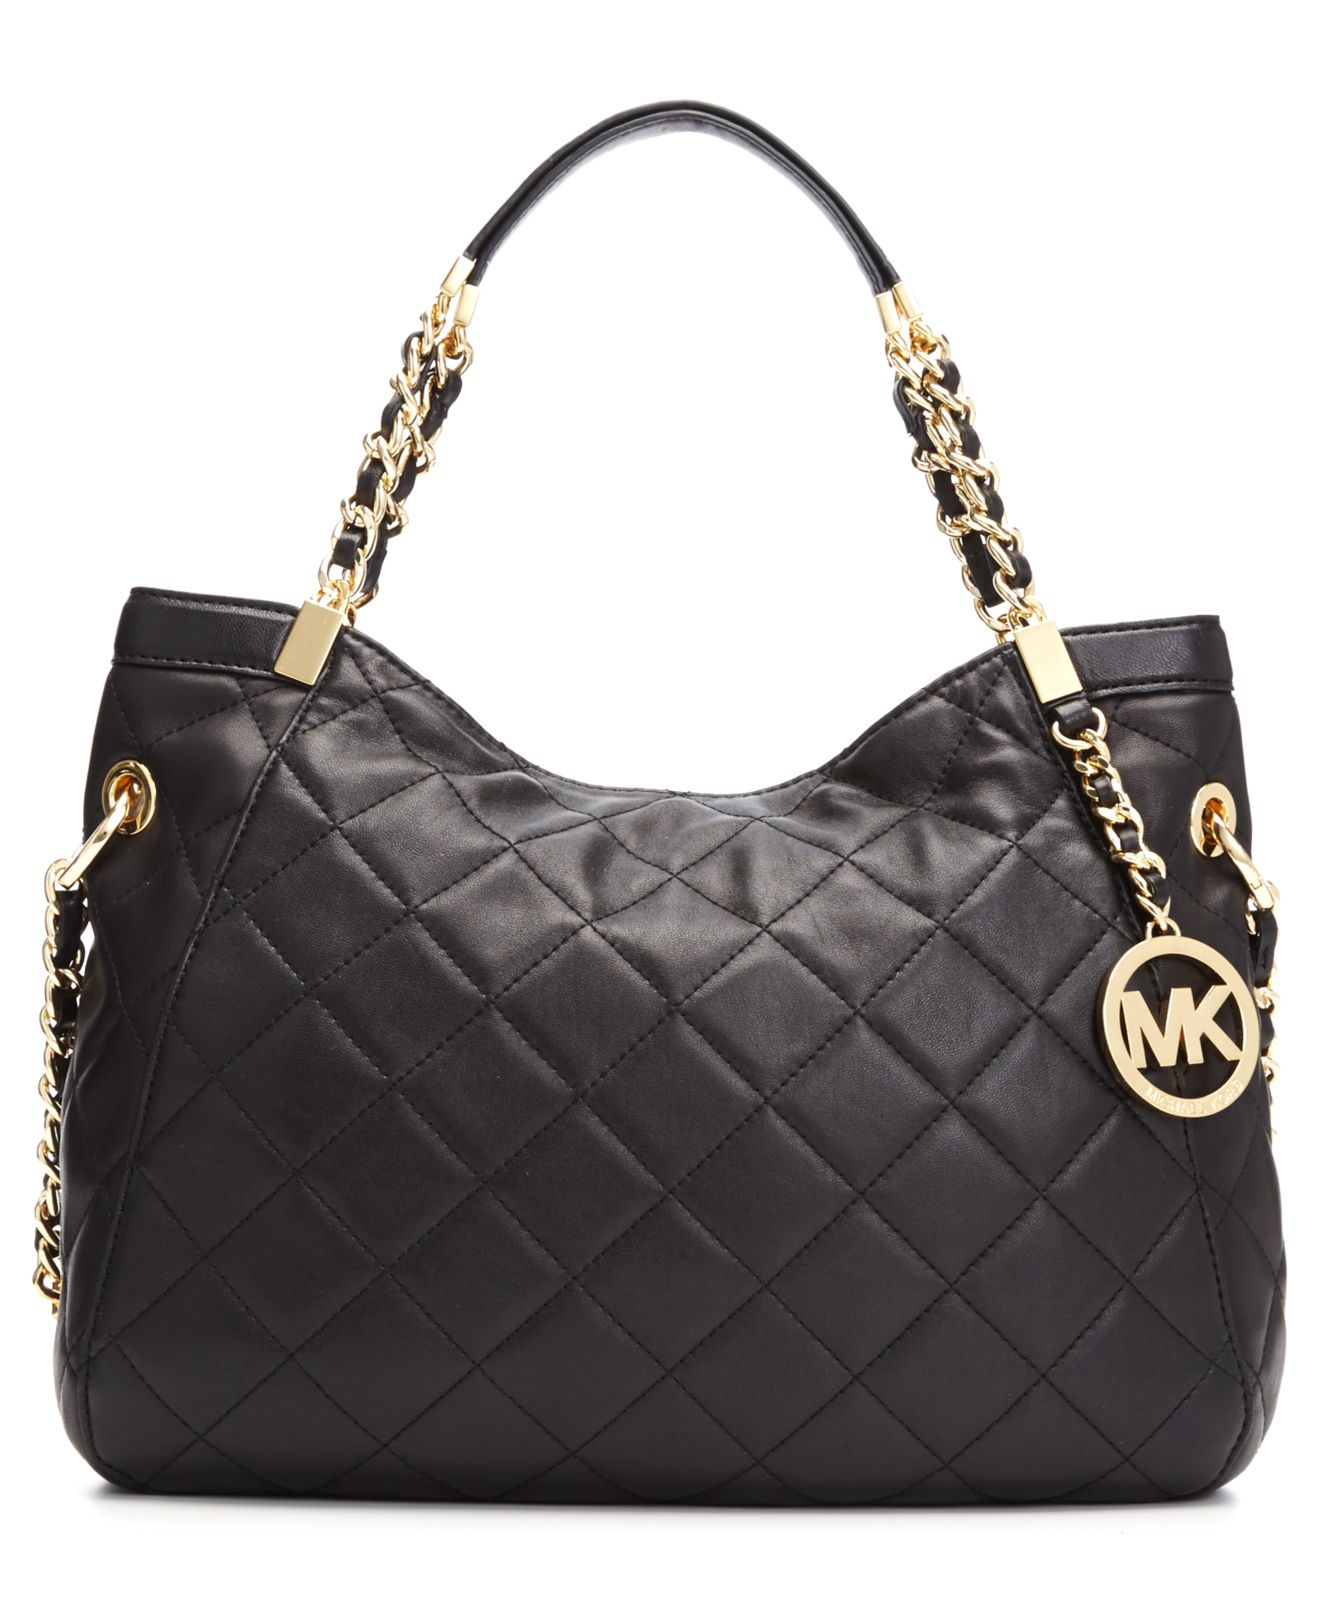 Michael Kors Leather Michael Susannah Medium Quilted Shoulder Tote in Black/Gold (Black) - Lyst